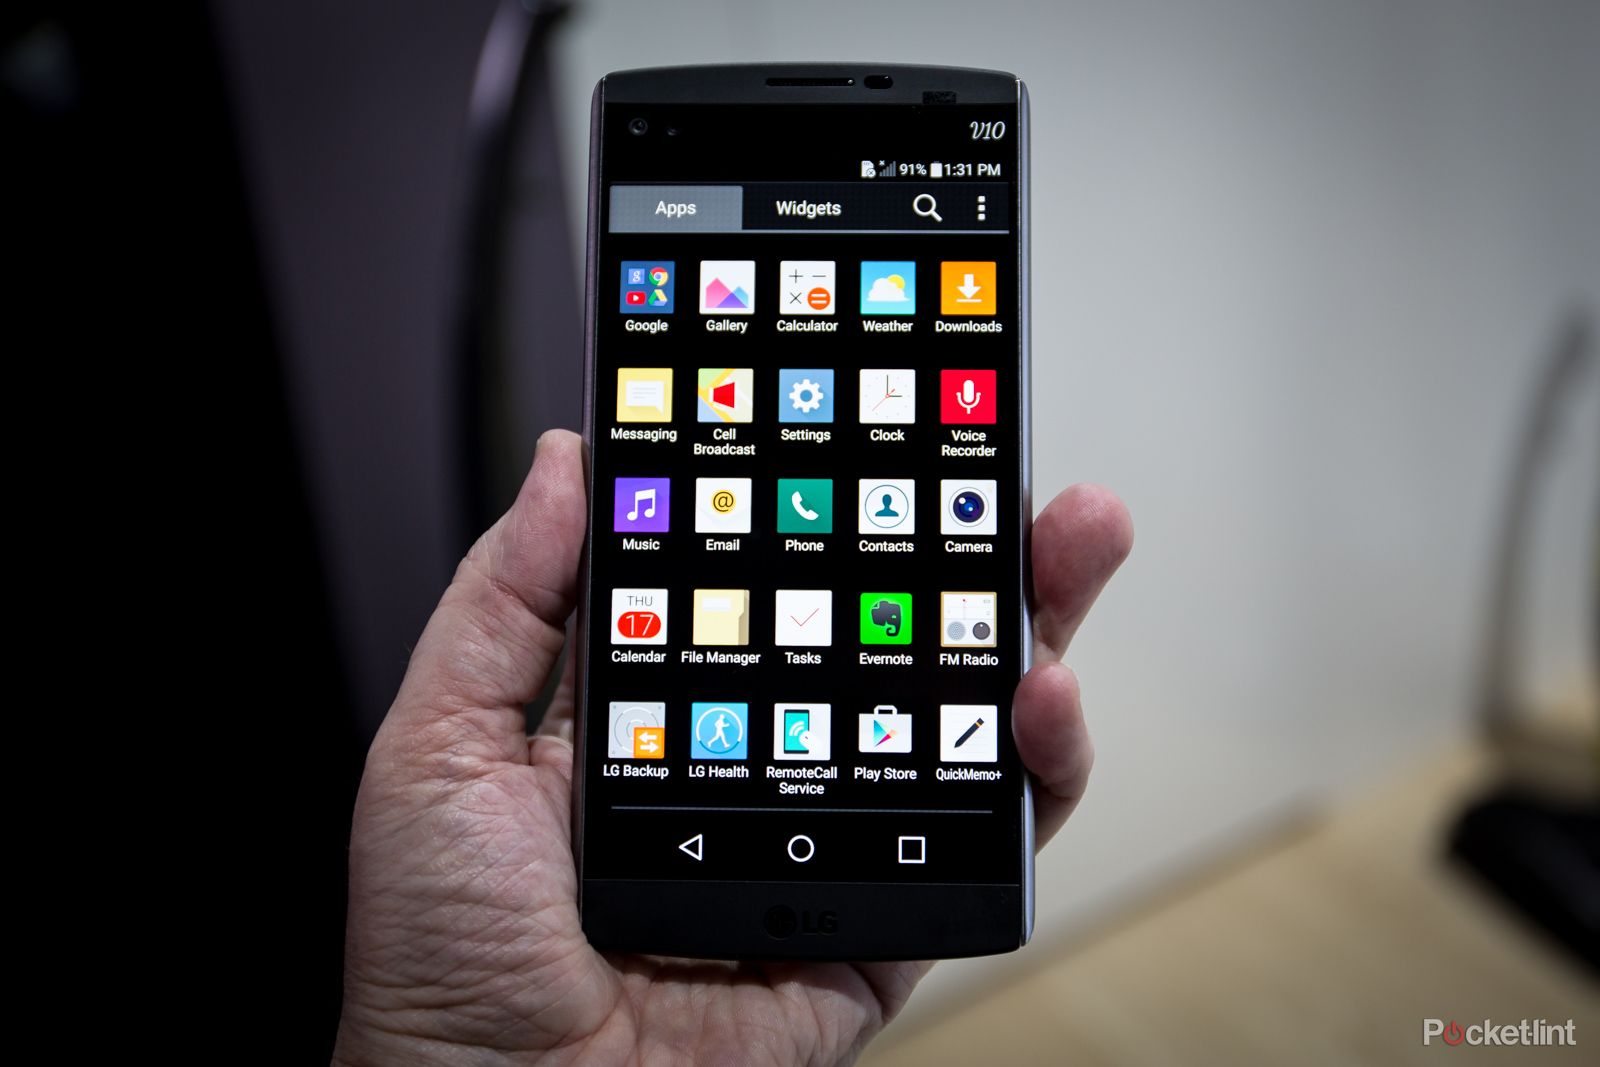 lg v10 smartphone coming to the uk image 10